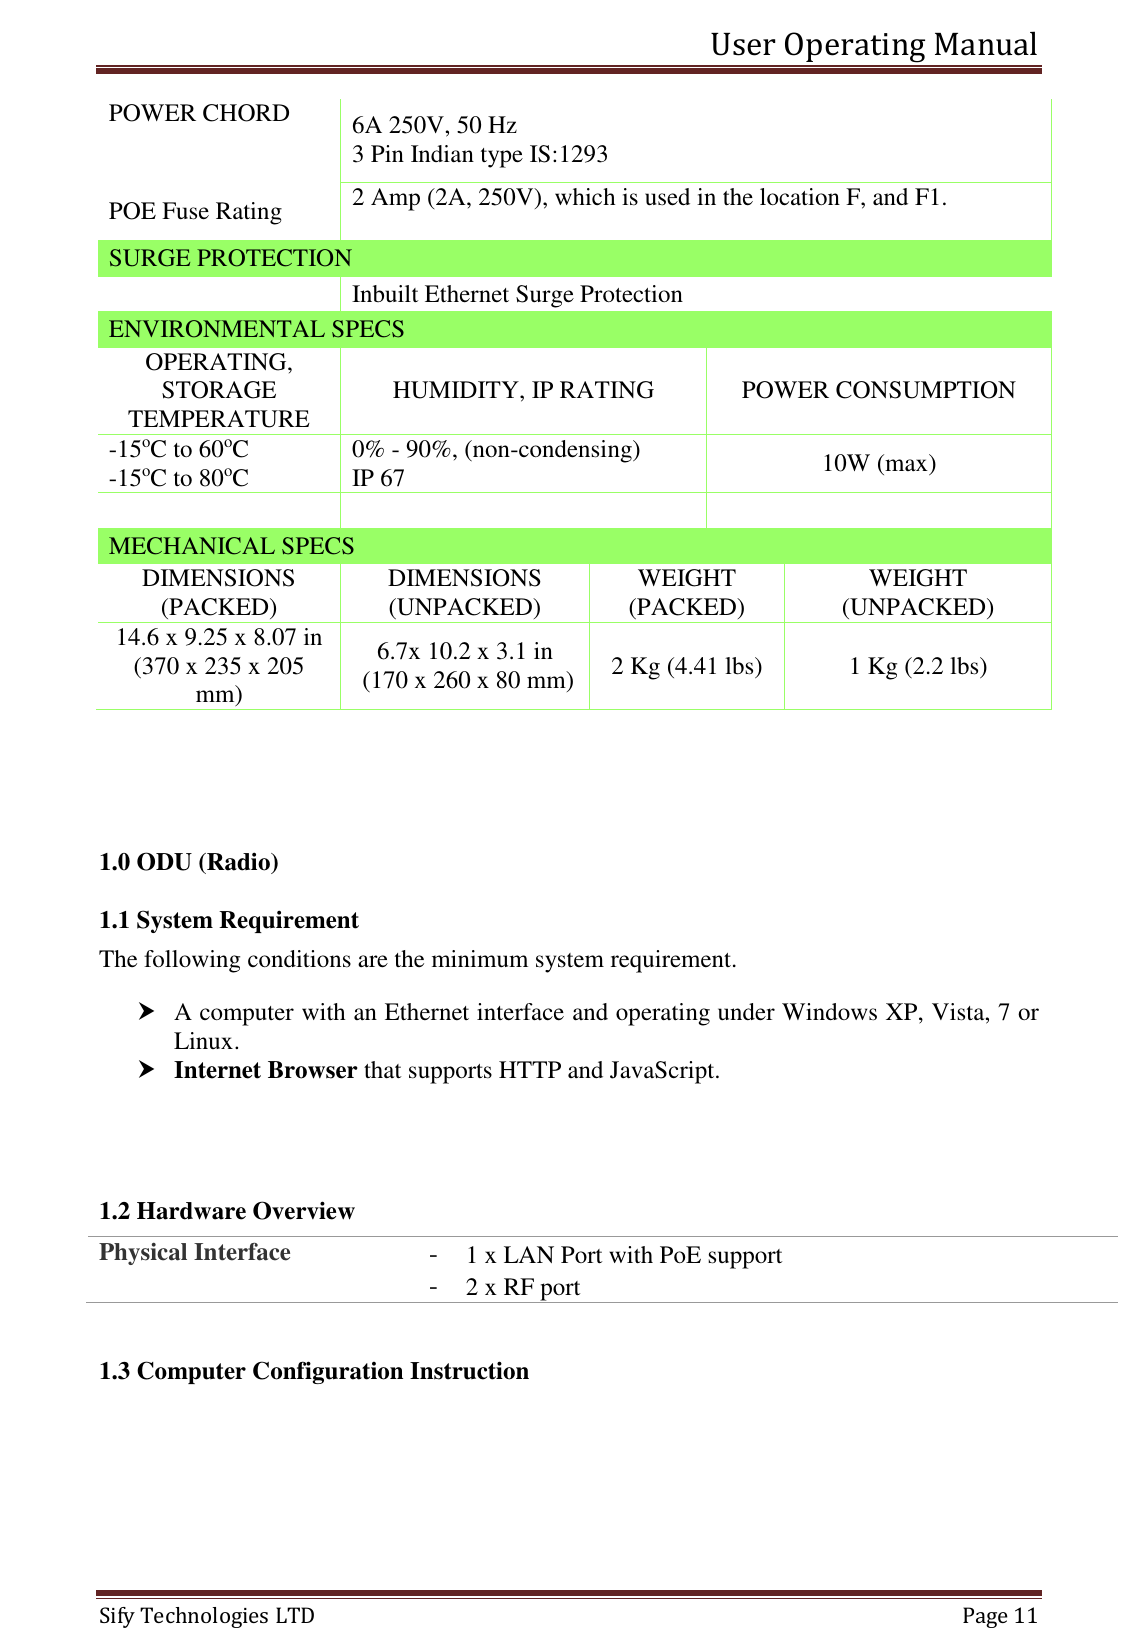 User Operating Manual   Sify Technologies LTD   Page 11 POWER CHORD   6A 250V, 50 Hz 3 Pin Indian type IS:1293 POE Fuse Rating 2 Amp (2A, 250V), which is used in the location F, and F1.  SURGE PROTECTION   Inbuilt Ethernet Surge Protection ENVIRONMENTAL SPECS OPERATING, STORAGE TEMPERATURE HUMIDITY, IP RATING POWER CONSUMPTION -15oC to 60oC -15oC to 80oC 0% - 90%, (non-condensing) IP 67 10W (max)    MECHANICAL SPECS DIMENSIONS (PACKED) DIMENSIONS (UNPACKED) WEIGHT (PACKED) WEIGHT (UNPACKED) 14.6 x 9.25 x 8.07 in (370 x 235 x 205 mm) 6.7x 10.2 x 3.1 in  (170 x 260 x 80 mm) 2 Kg (4.41 lbs) 1 Kg (2.2 lbs)   1.0 ODU (Radio) 1.1 System Requirement The following conditions are the minimum system requirement.  A computer with an Ethernet interface and operating under Windows XP, Vista, 7 or Linux.  Internet Browser that supports HTTP and JavaScript.   1.2 Hardware Overview Physical Interface - 1 x LAN Port with PoE support - 2 x RF port  1.3 Computer Configuration Instruction 